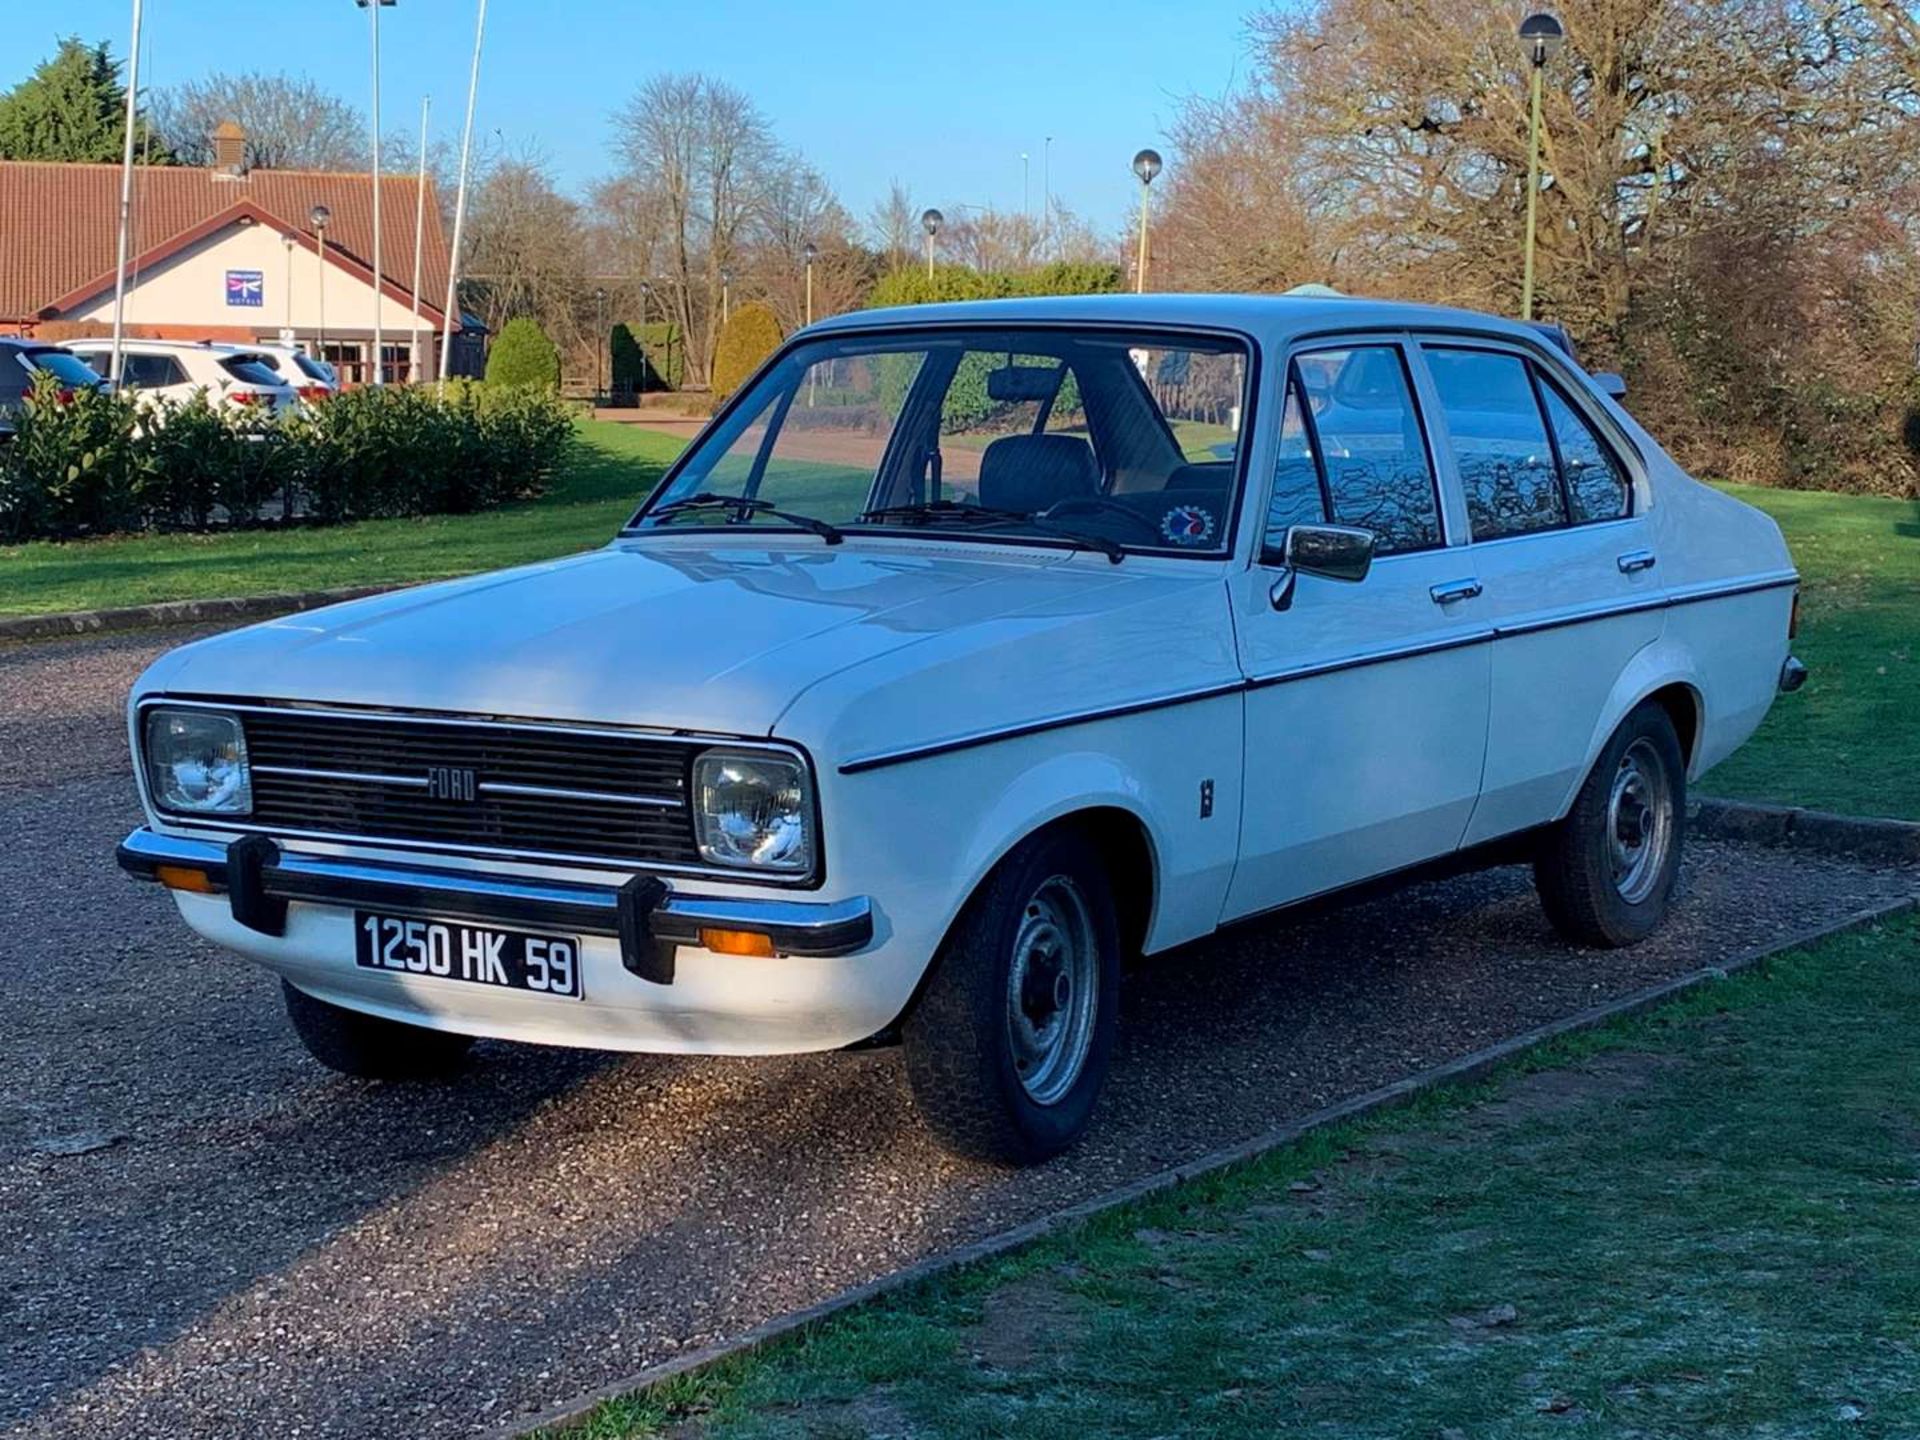 1975 FORD ESCORT GL 1.3 AUTO MKII LHD - Image 3 of 29